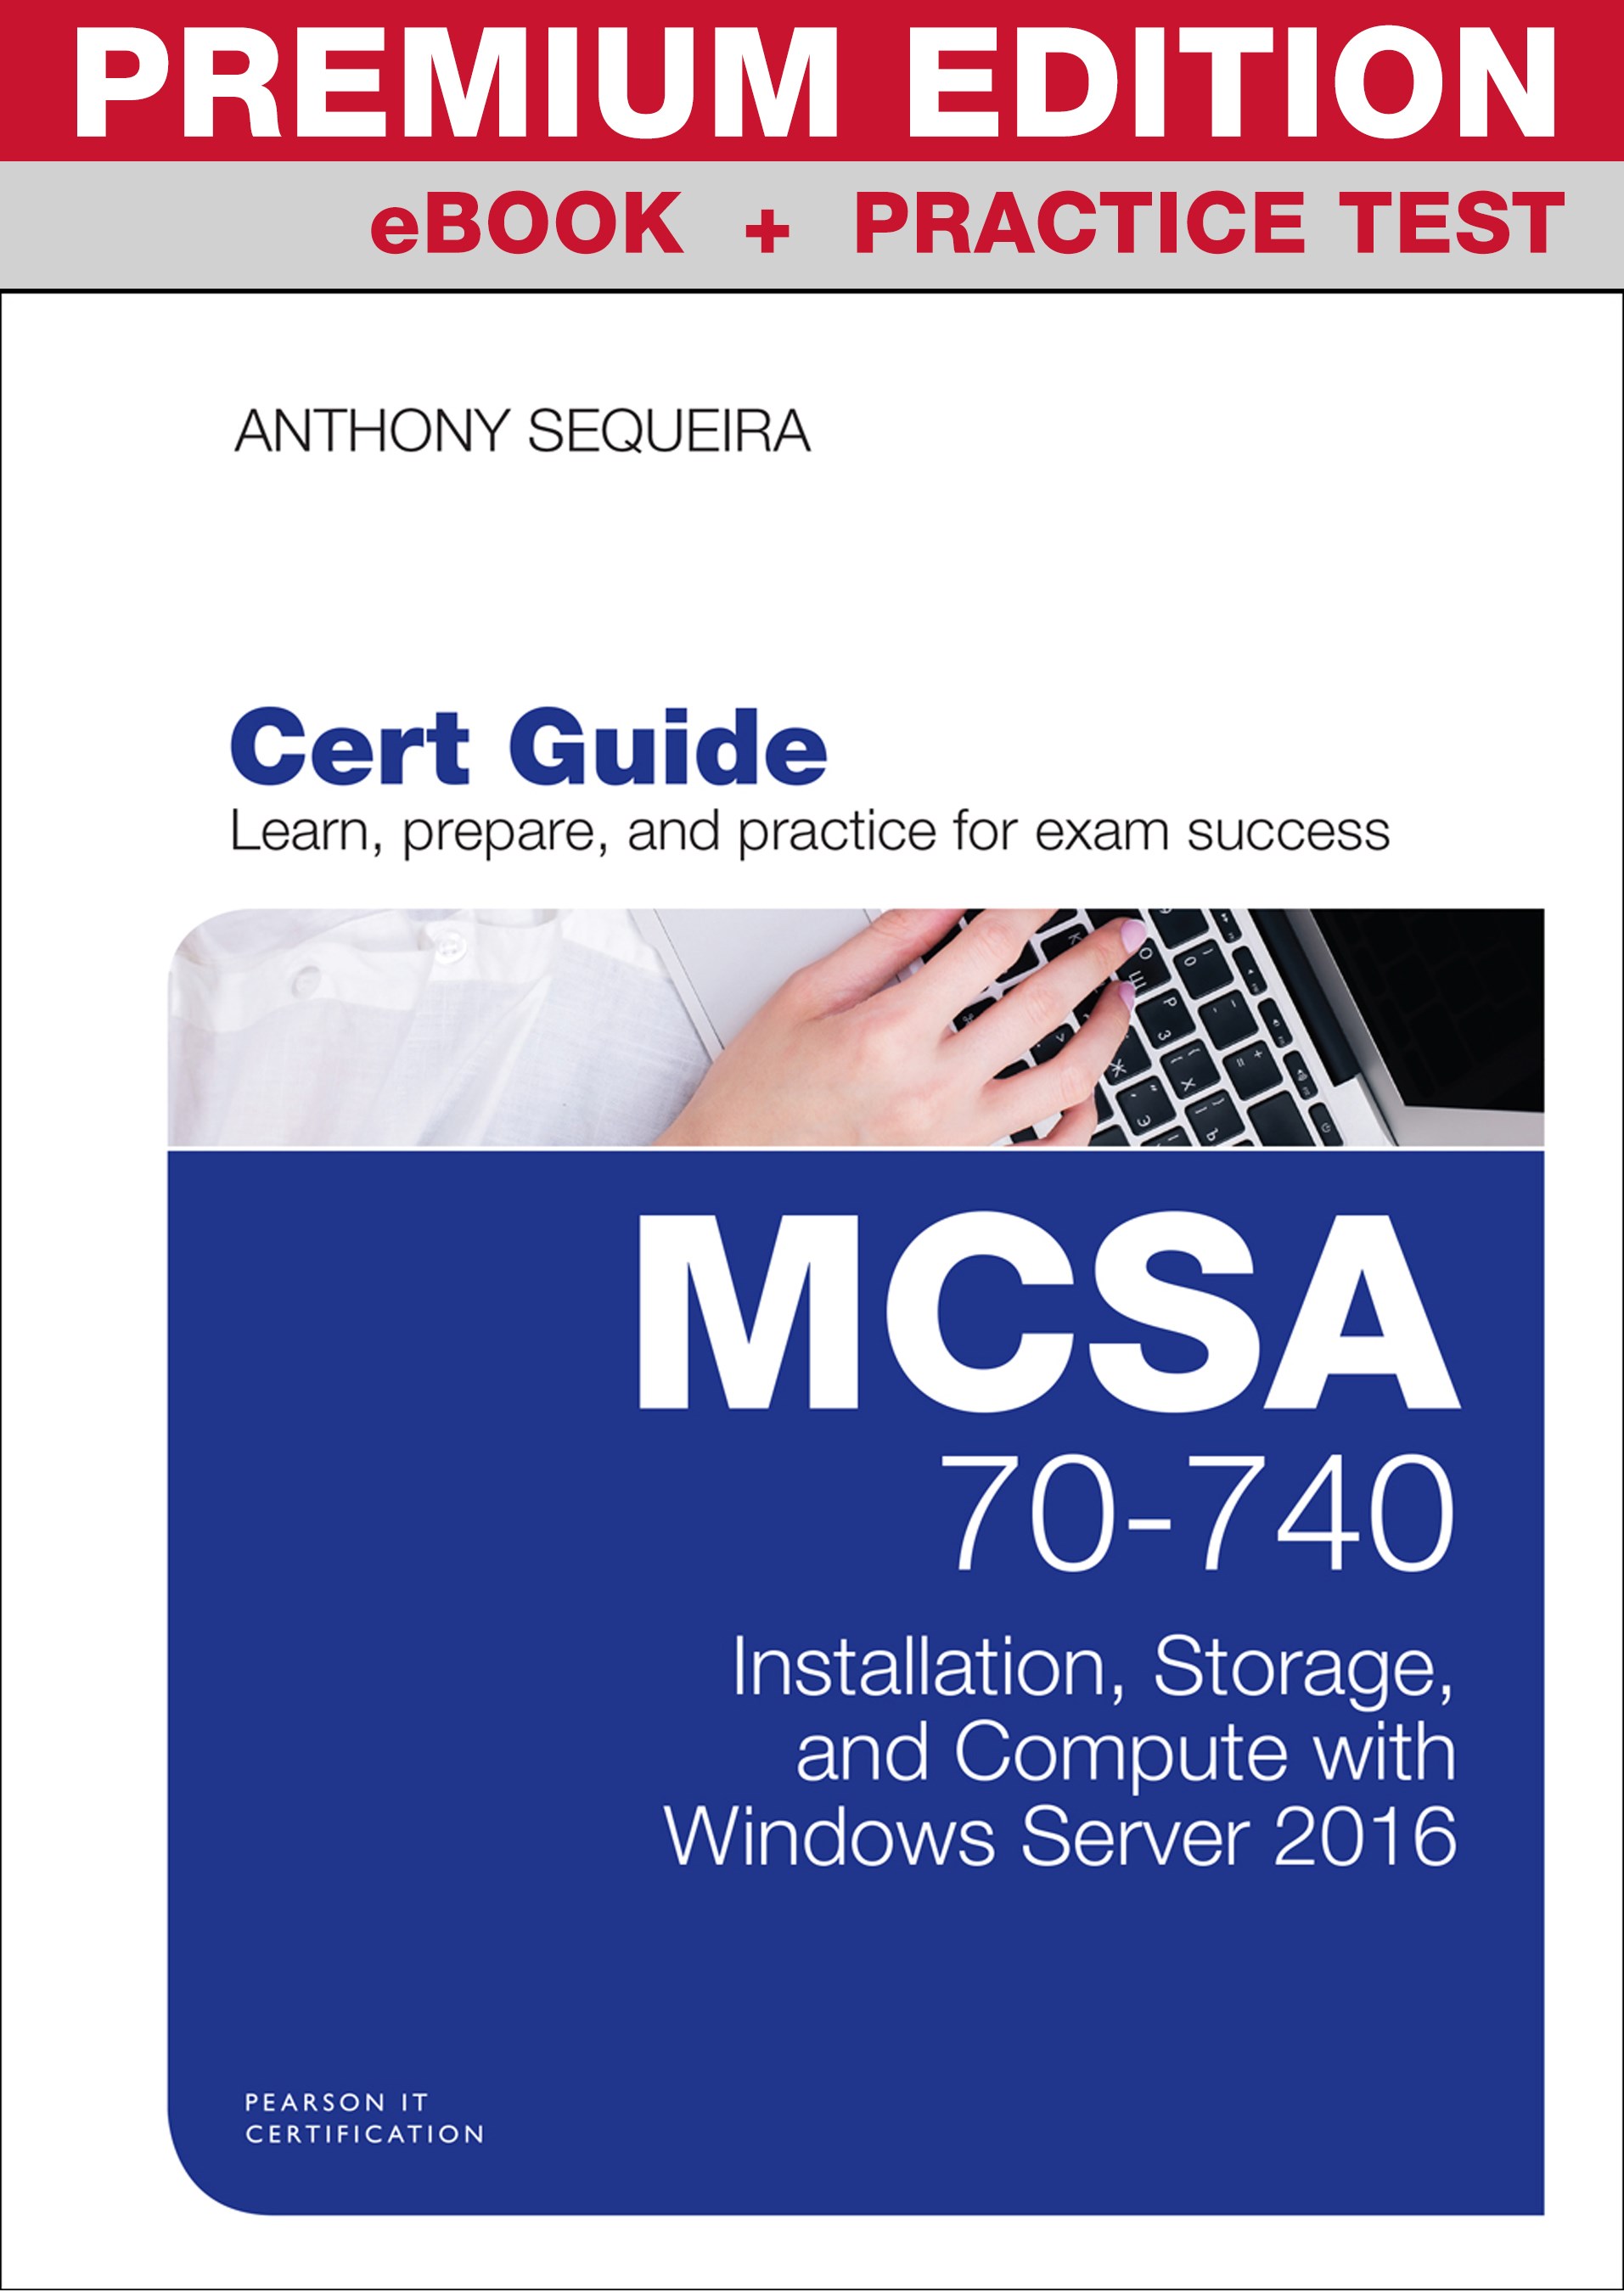 MCSA 70-740 Cert Guide Premium Edition and Practice Tests: Installation, Storage, and Compute with Windows Server 2016